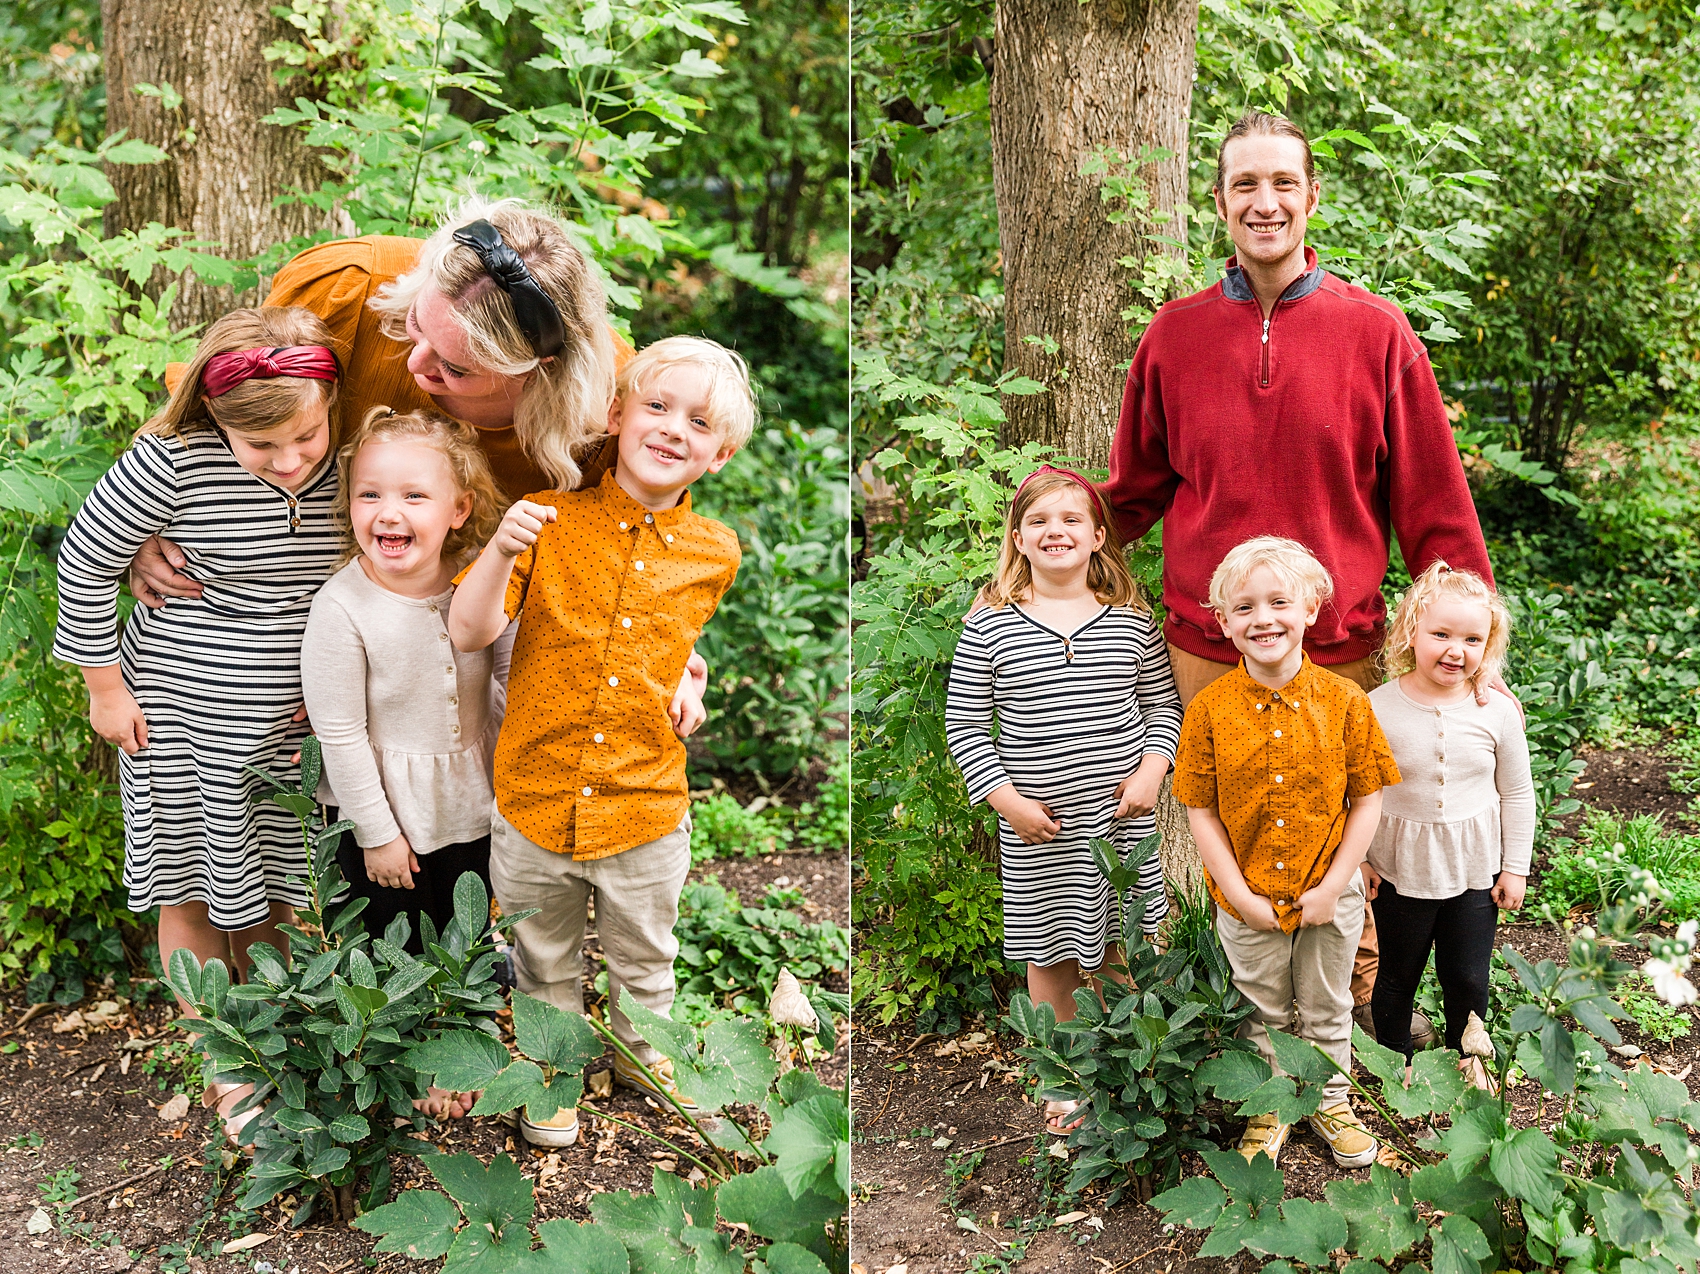 Leah Hope Photography | Salt Lake City Utah Family Photos | Green Nature Ivy Trees | Family Pictures | What to Wear | Family Posing Poses | Scottsdale Photographer | Family Child Photographer | Outfits and Styling Ideas | Family Photography | Abi Ayres Family | Playful Candid Pictures